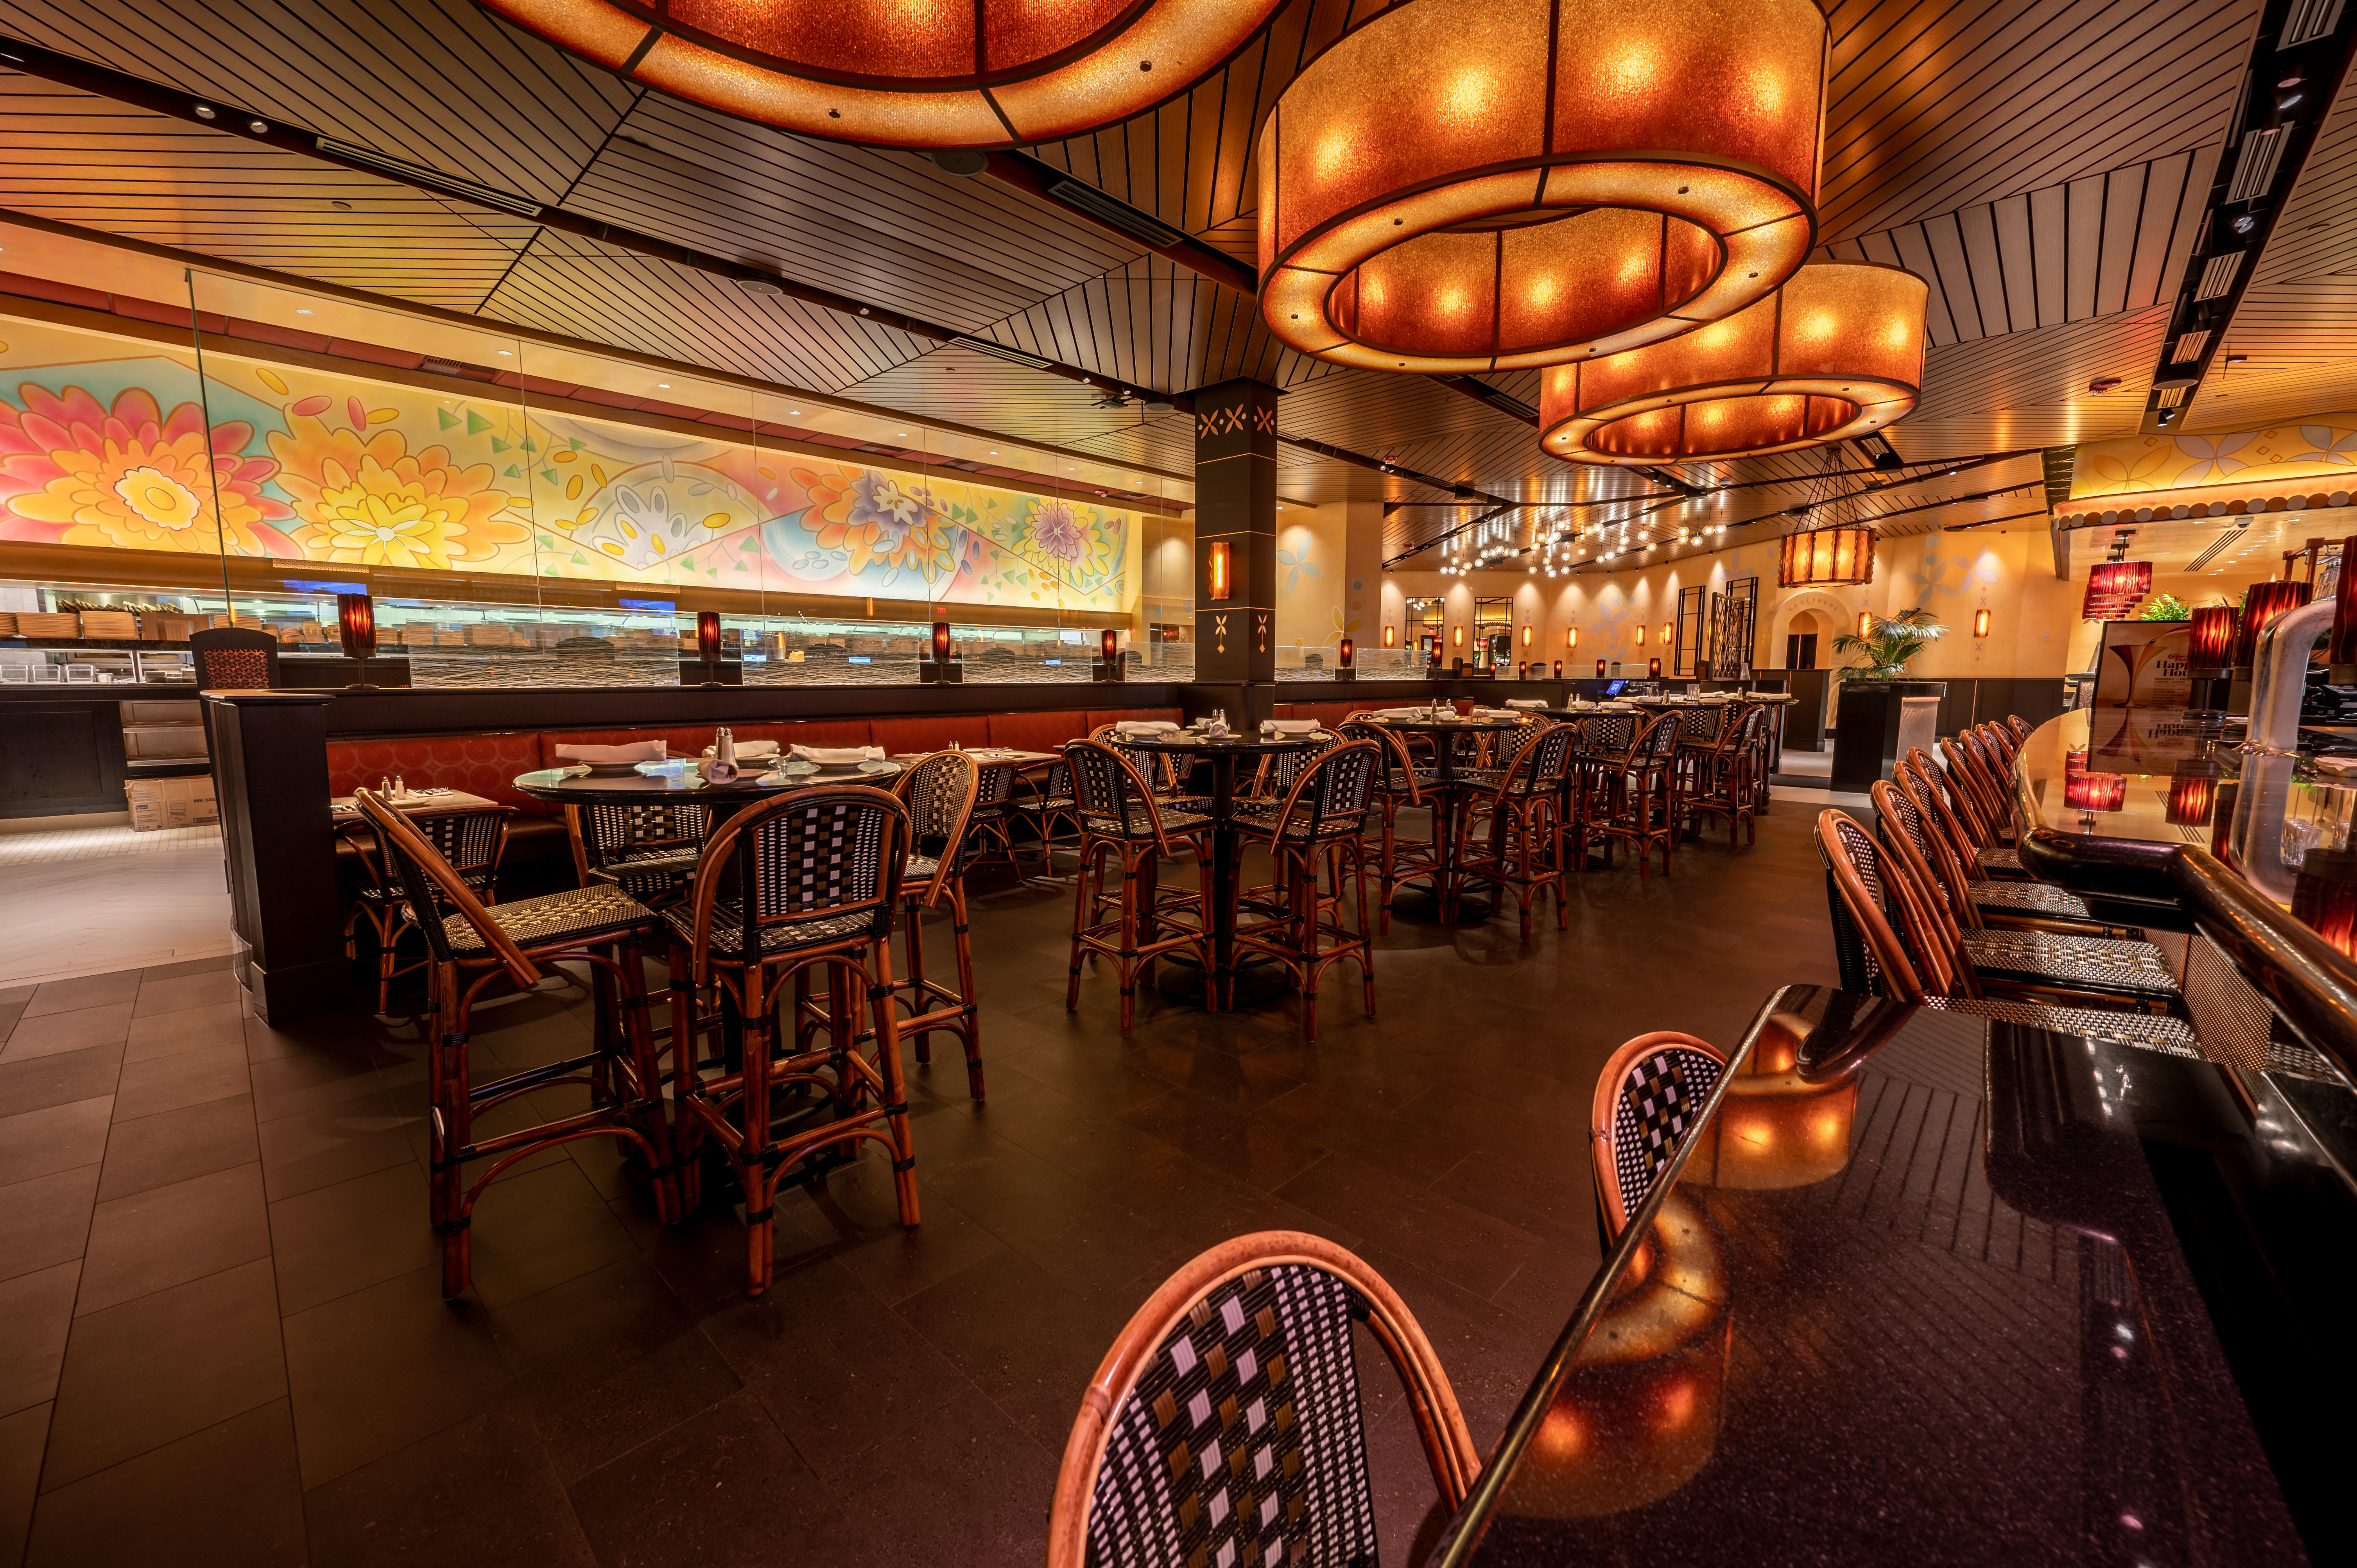 The Cheesecake Factory location in Opry Mills - Now Open store image five